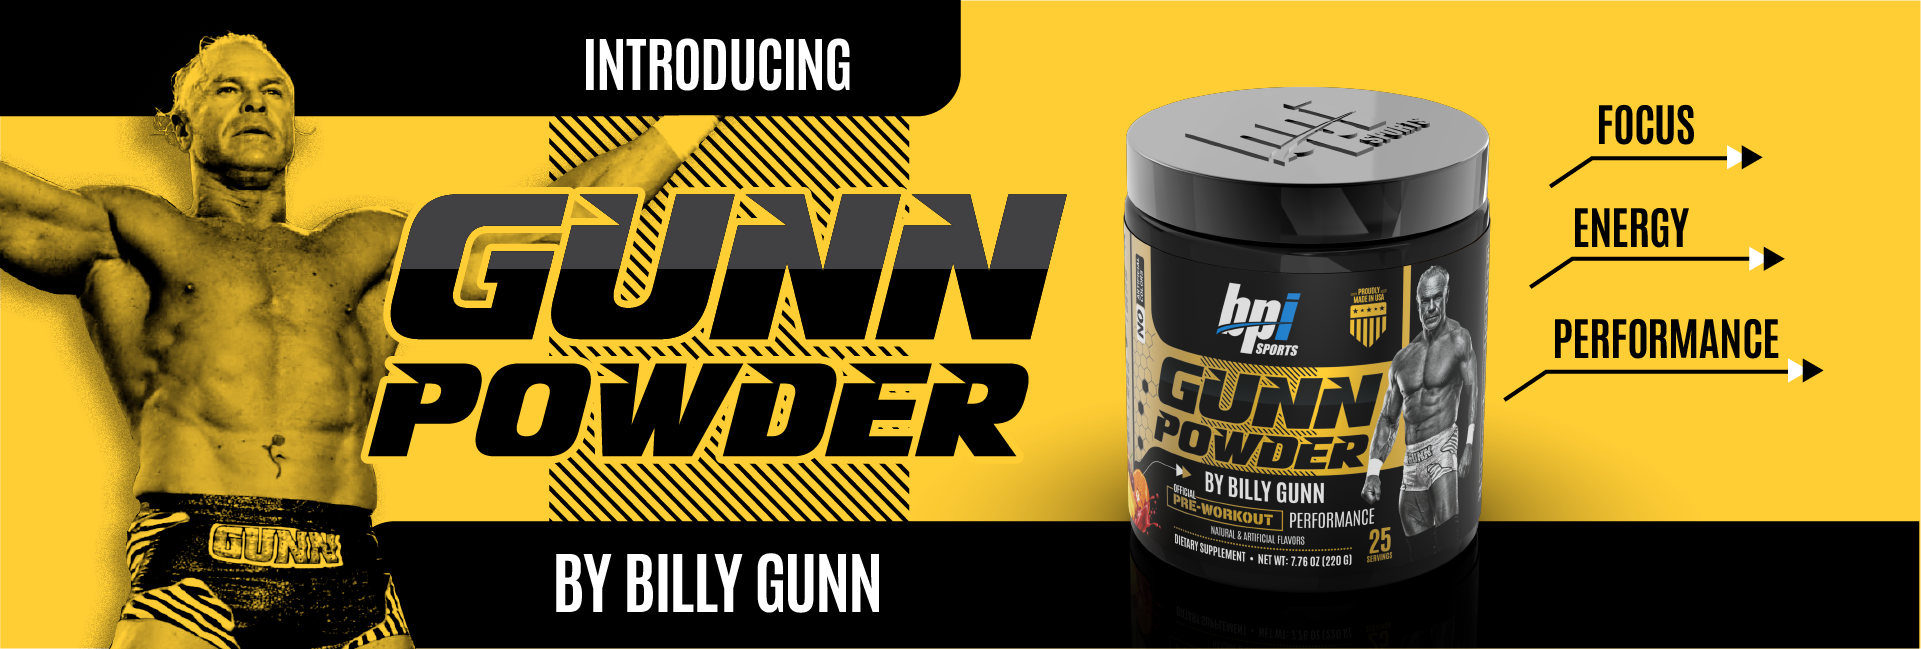 Container of Gunn Powder pre-workout with benefits and picture of Billy Gunn introducing Gunn Powder